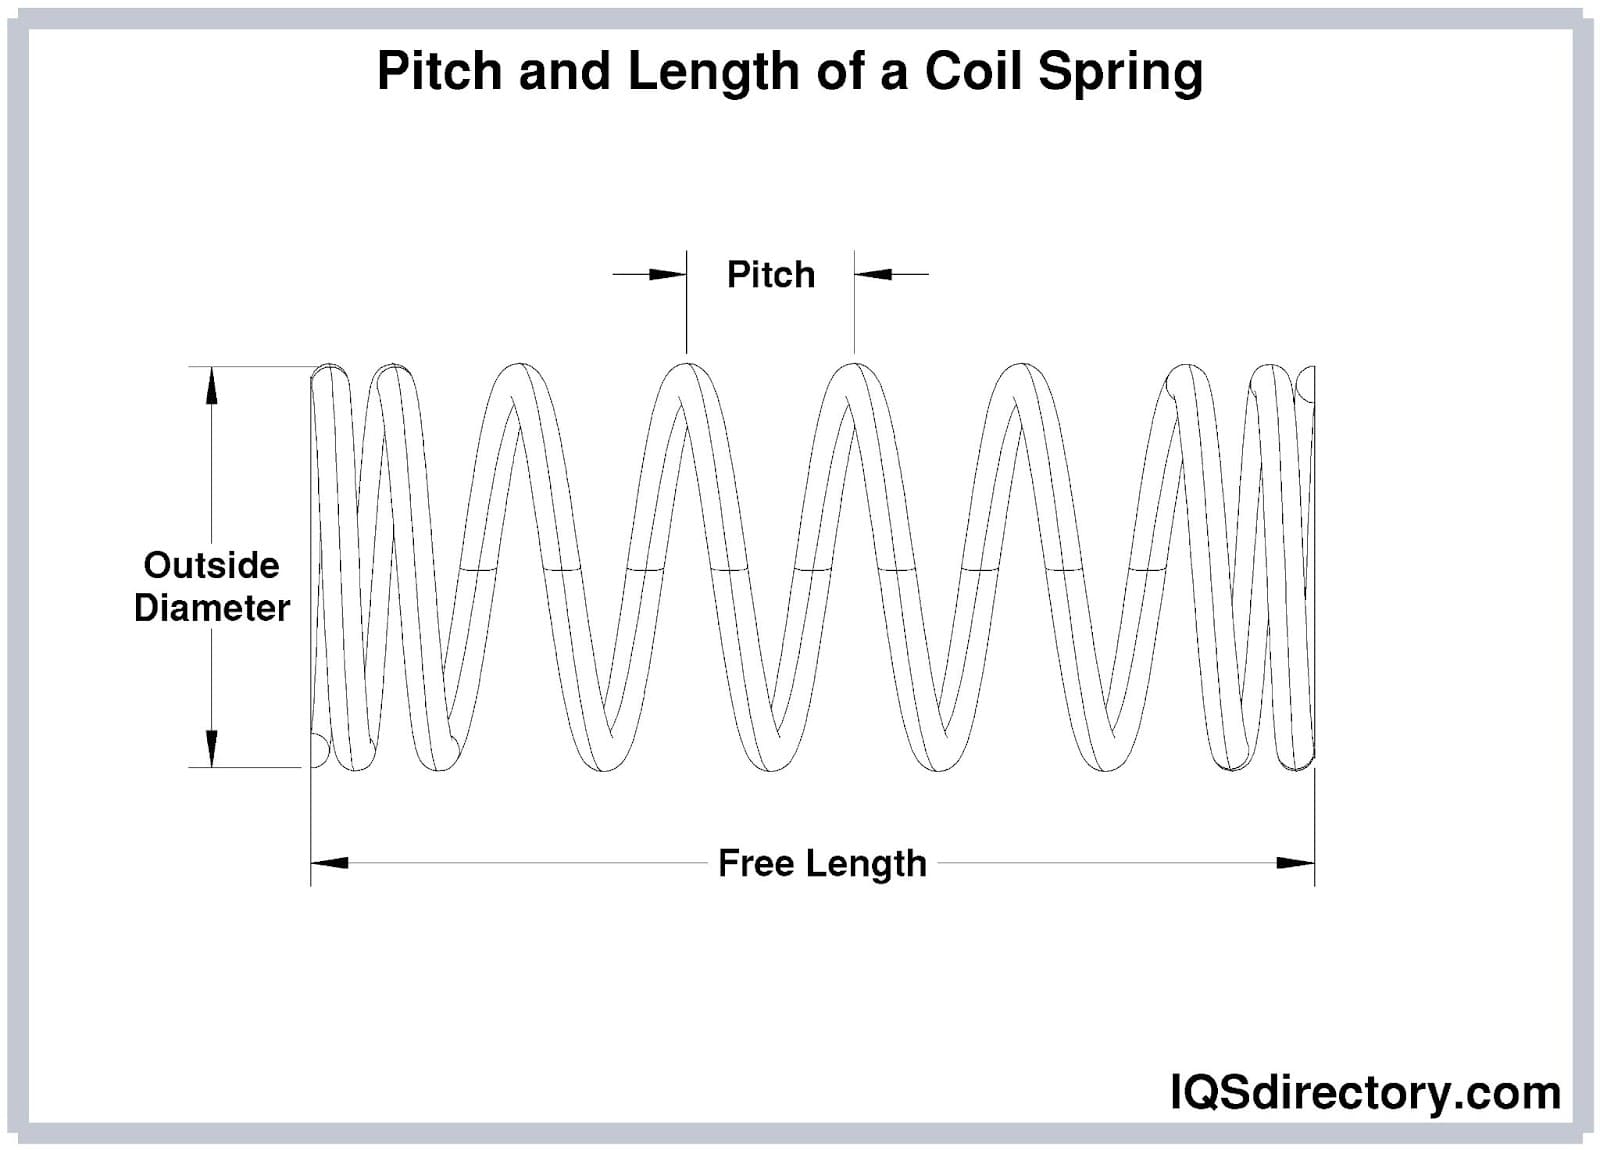 Pitch and Length of a Coil Spring